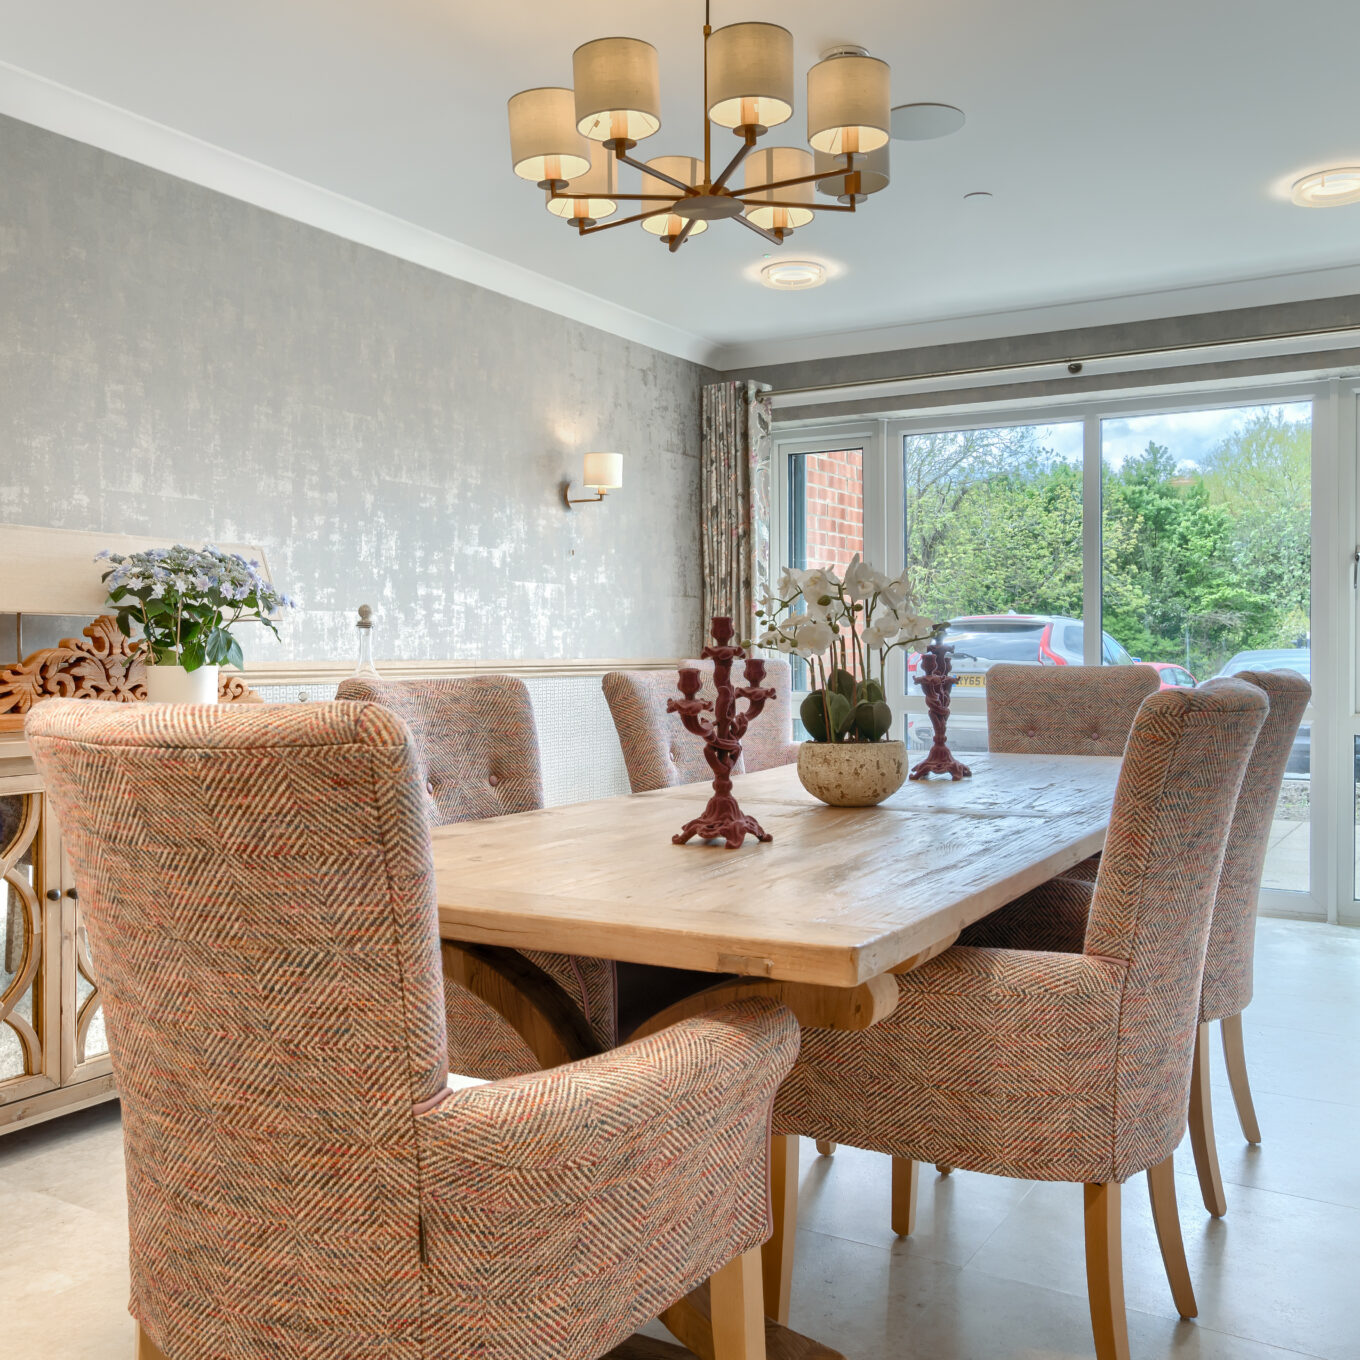 Private dining room with six chairs and table at Elmbrook Court Care Home in Wantage